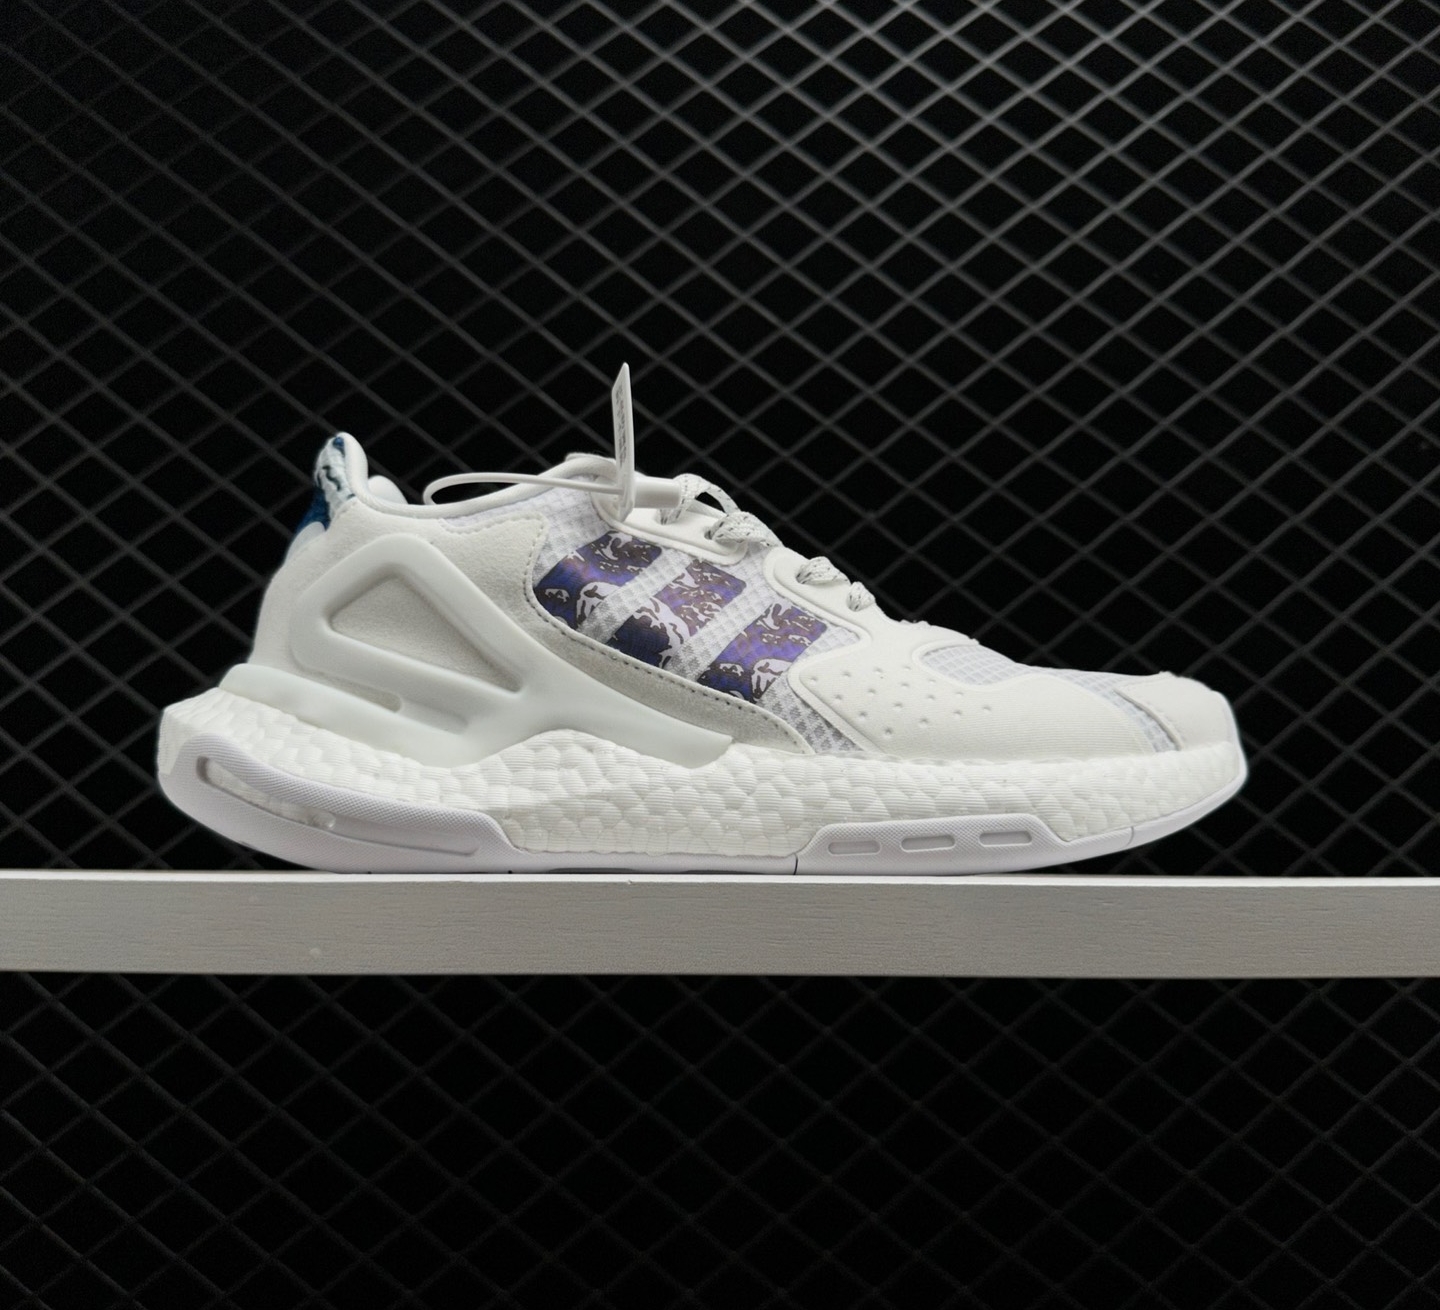 Adidas Day Jogger White Blue - Stylish and Comfortable Sneakers